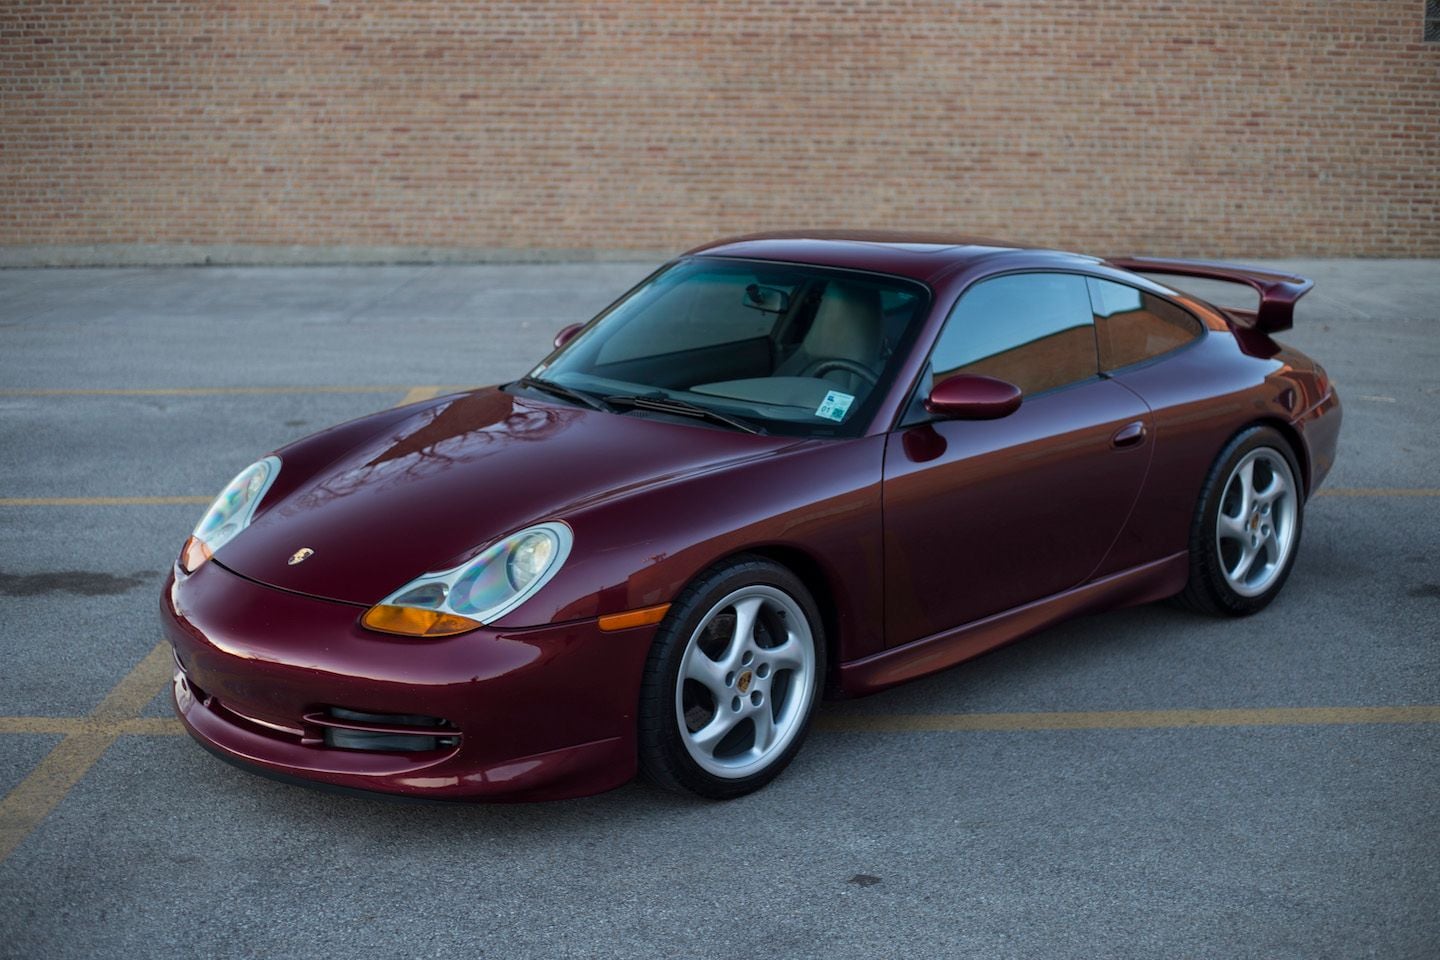 1999 Porsche 911 - 1999 Porsche 911 C2 - Aerokit - 6sp - 57k - Awesome Condition - Used - VIN WP0AA2996XS622101 - 56,800 Miles - 6 cyl - 2WD - Manual - Coupe - Other - Chicago, IL 60647, United States